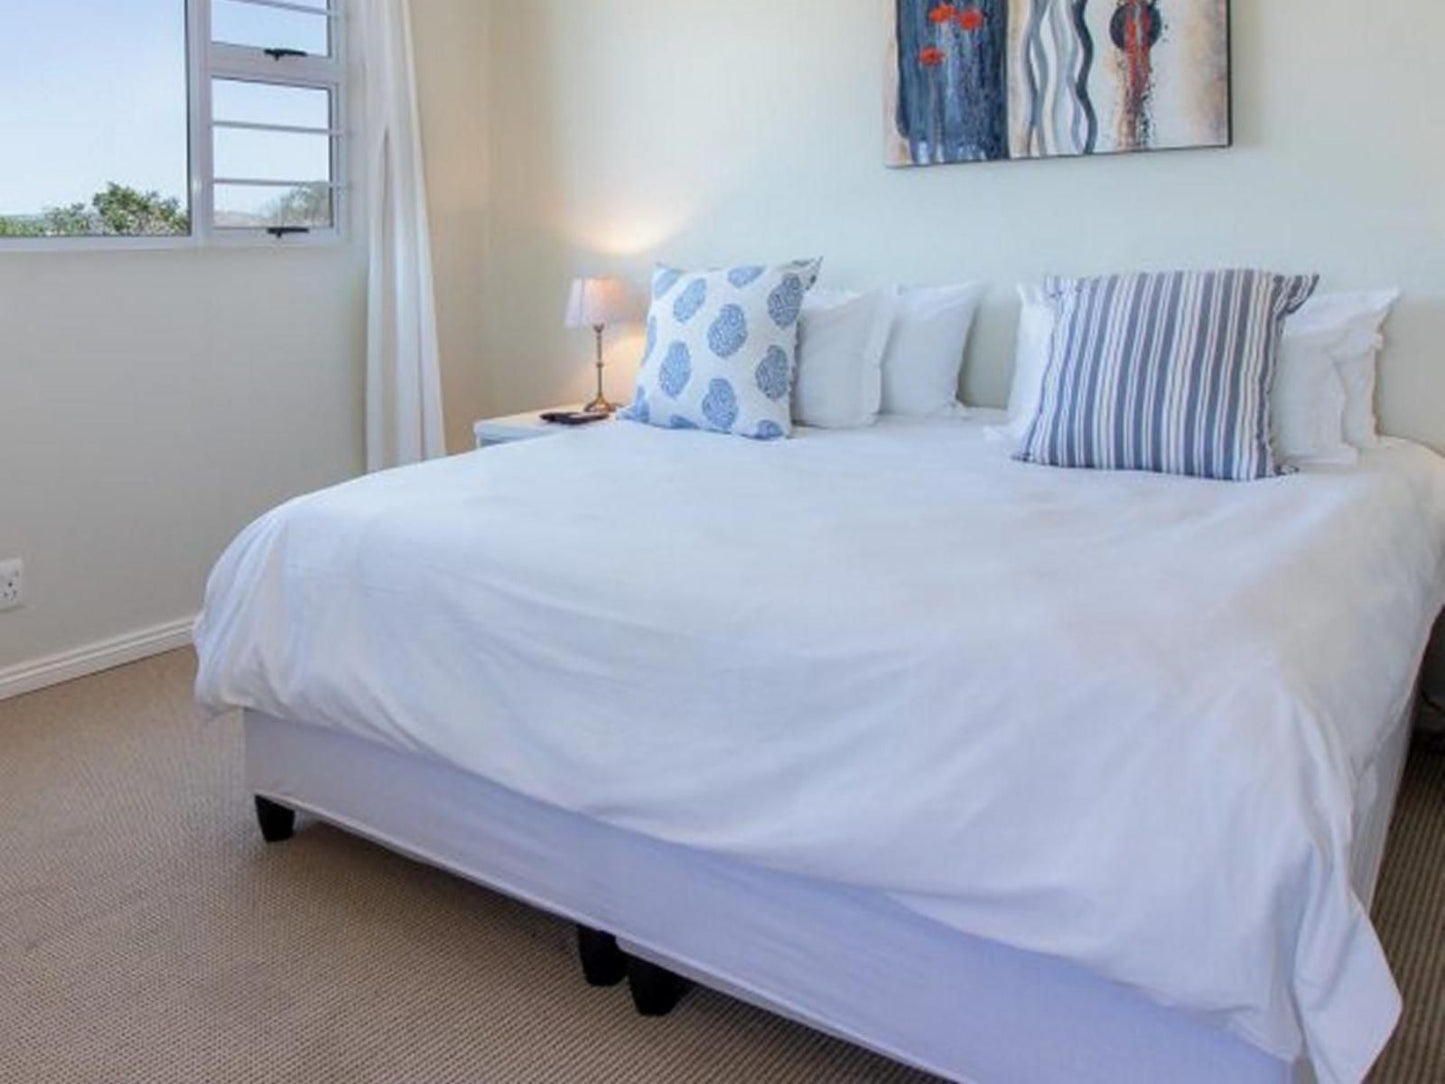 Alfred View Port Alfred Eastern Cape South Africa Bedroom